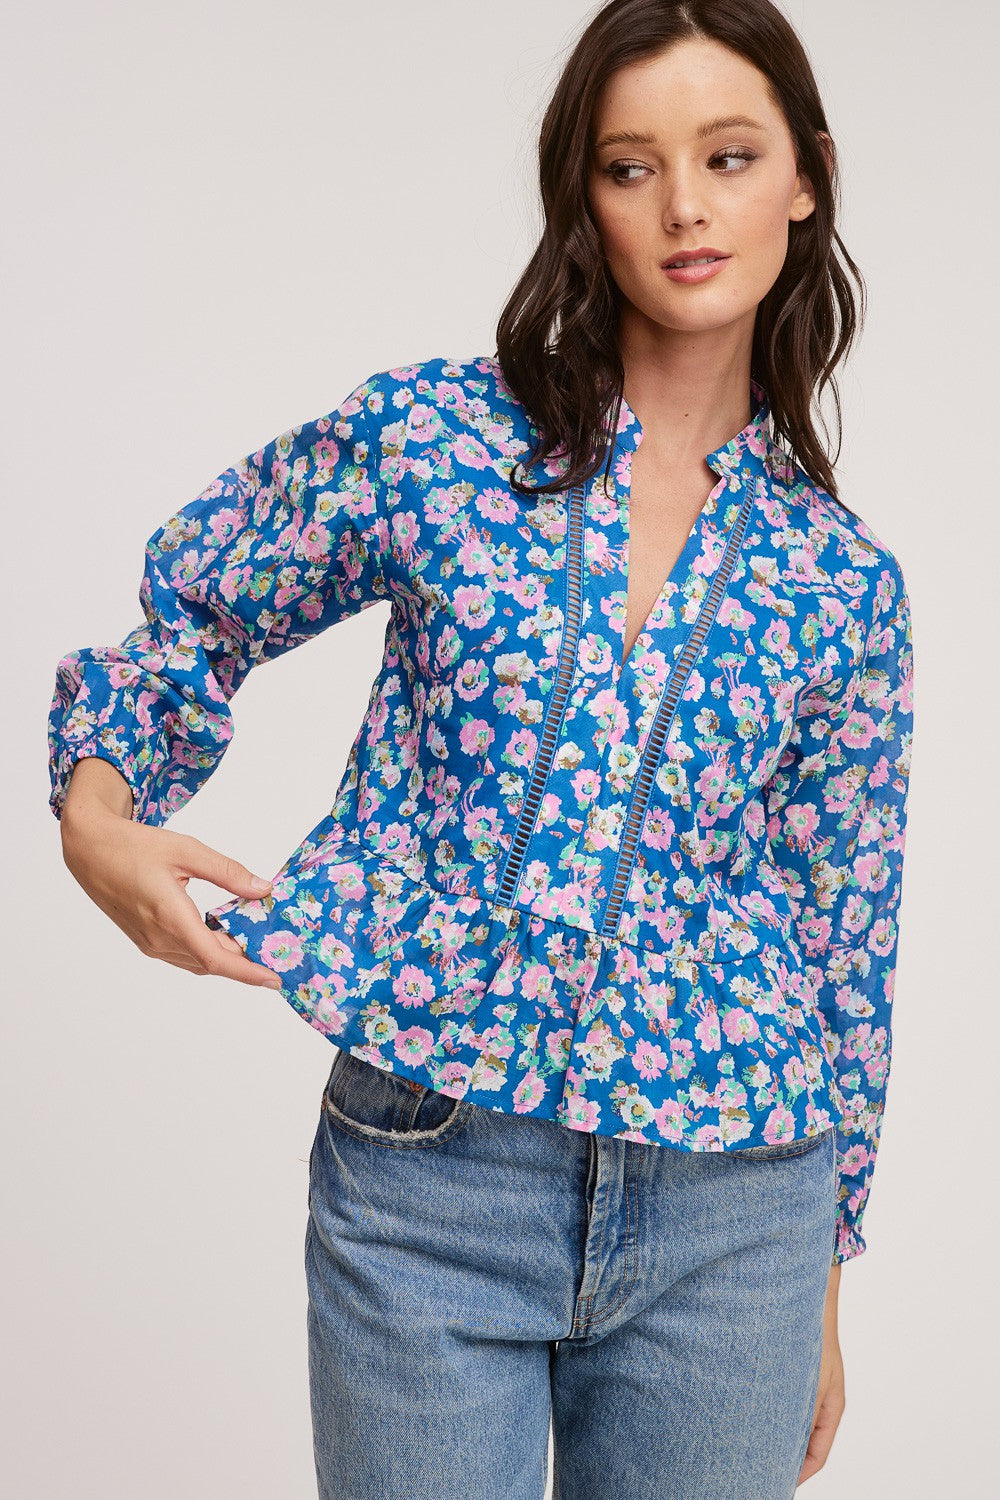 Apparel- Fanco Floral Embroidery Lace Top